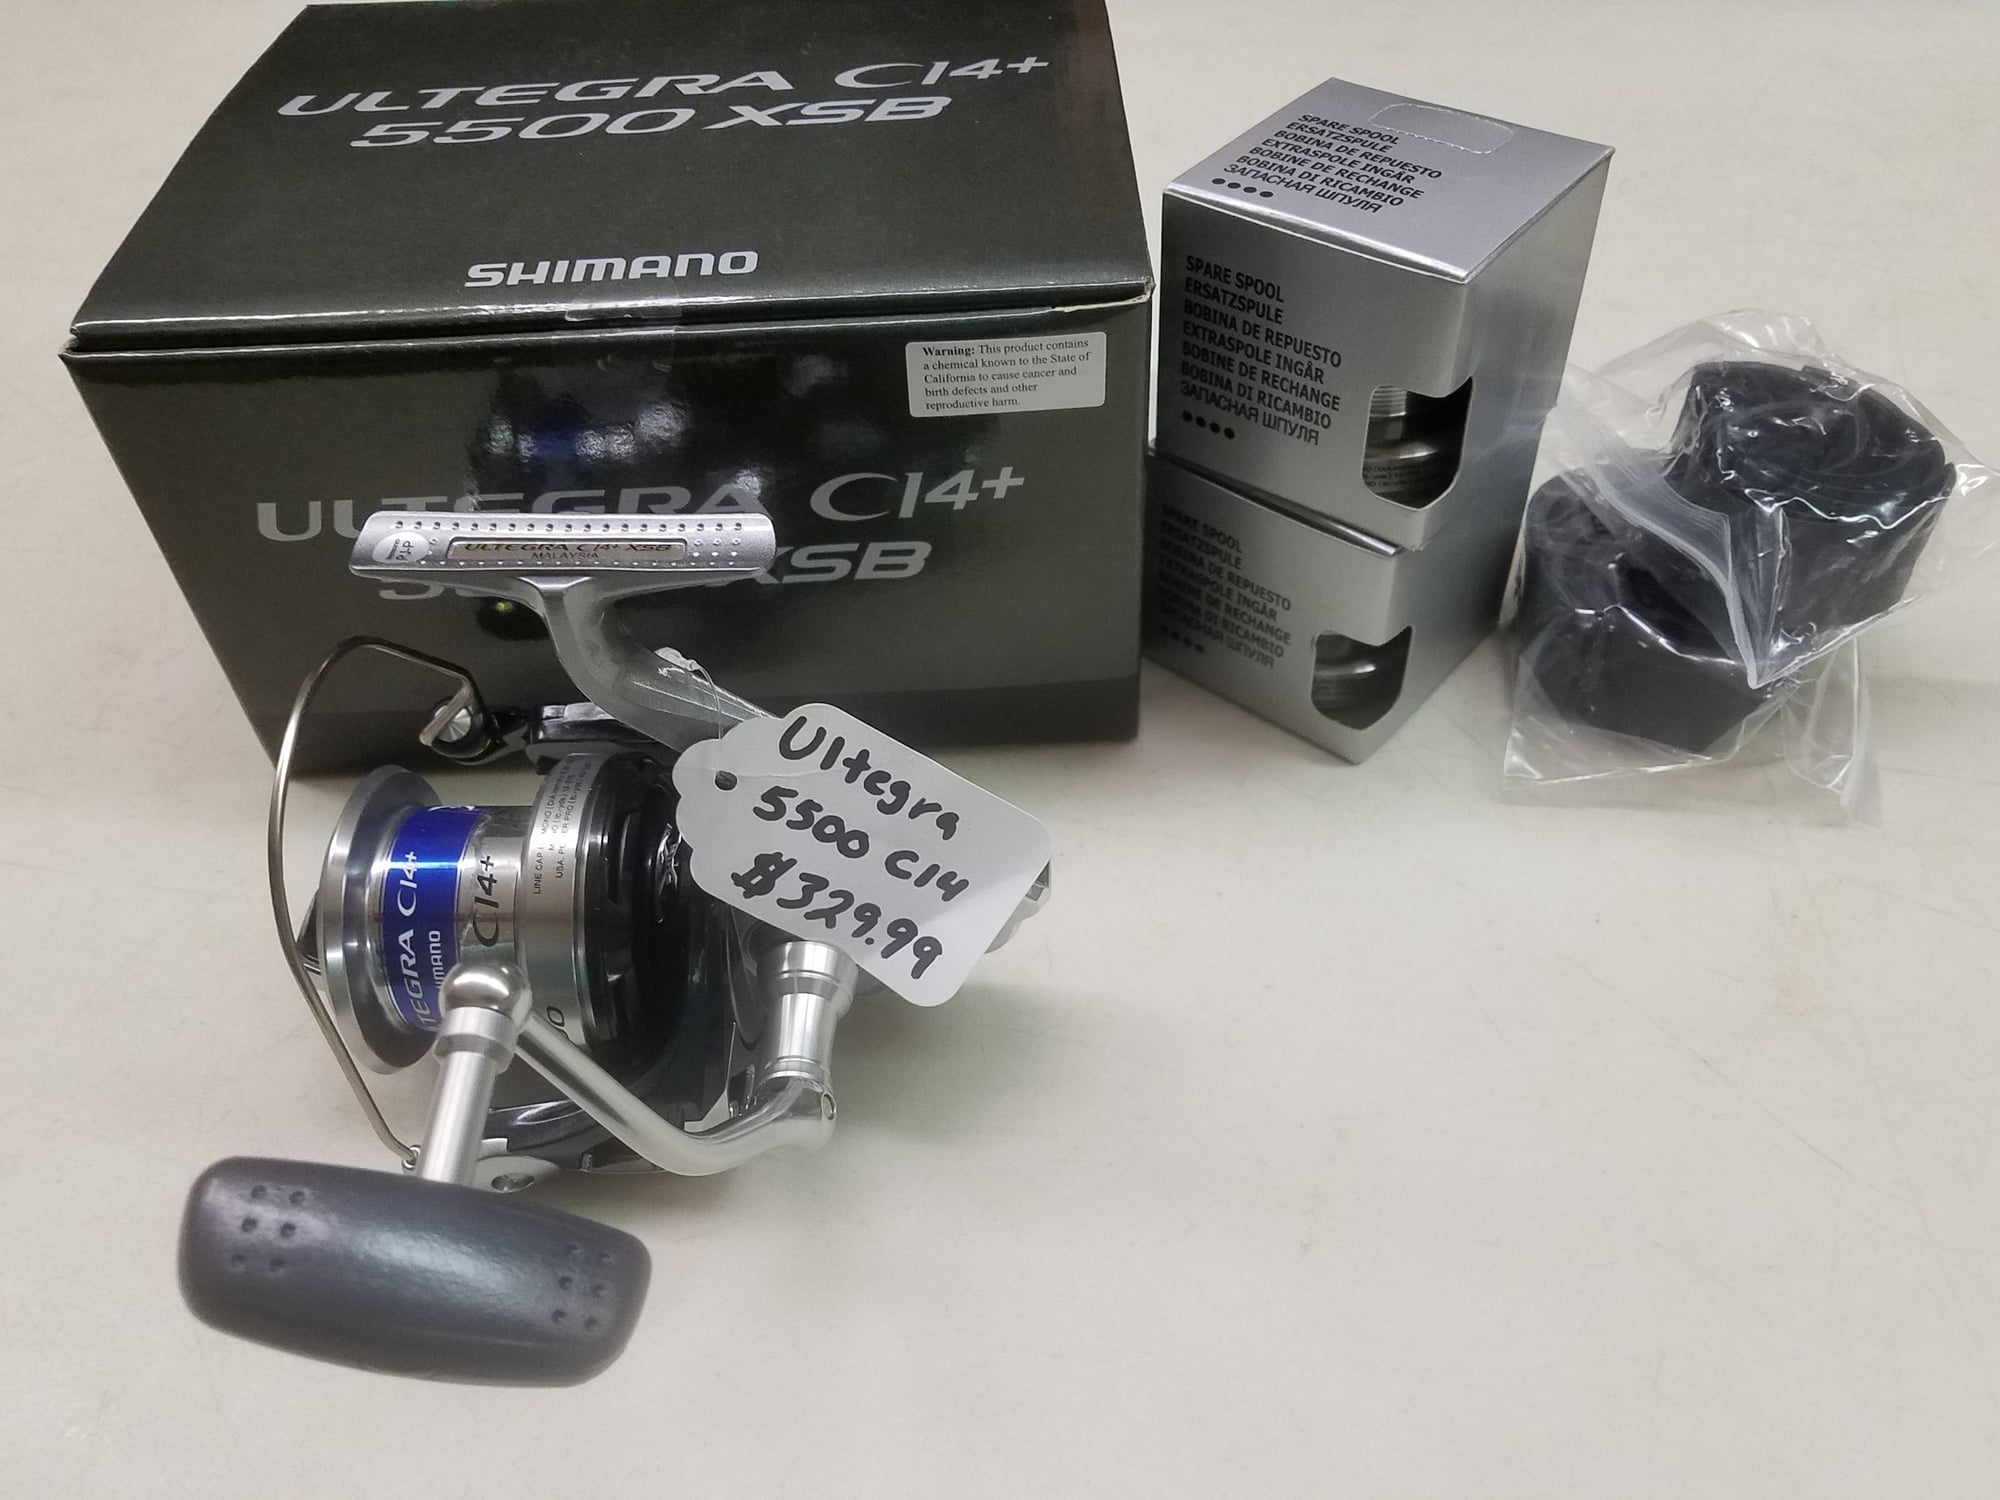 Shimano Ultegra CI4+ 5500XSB Spinning Reel With 2 New Spare Spools - The  Hull Truth - Boating and Fishing Forum